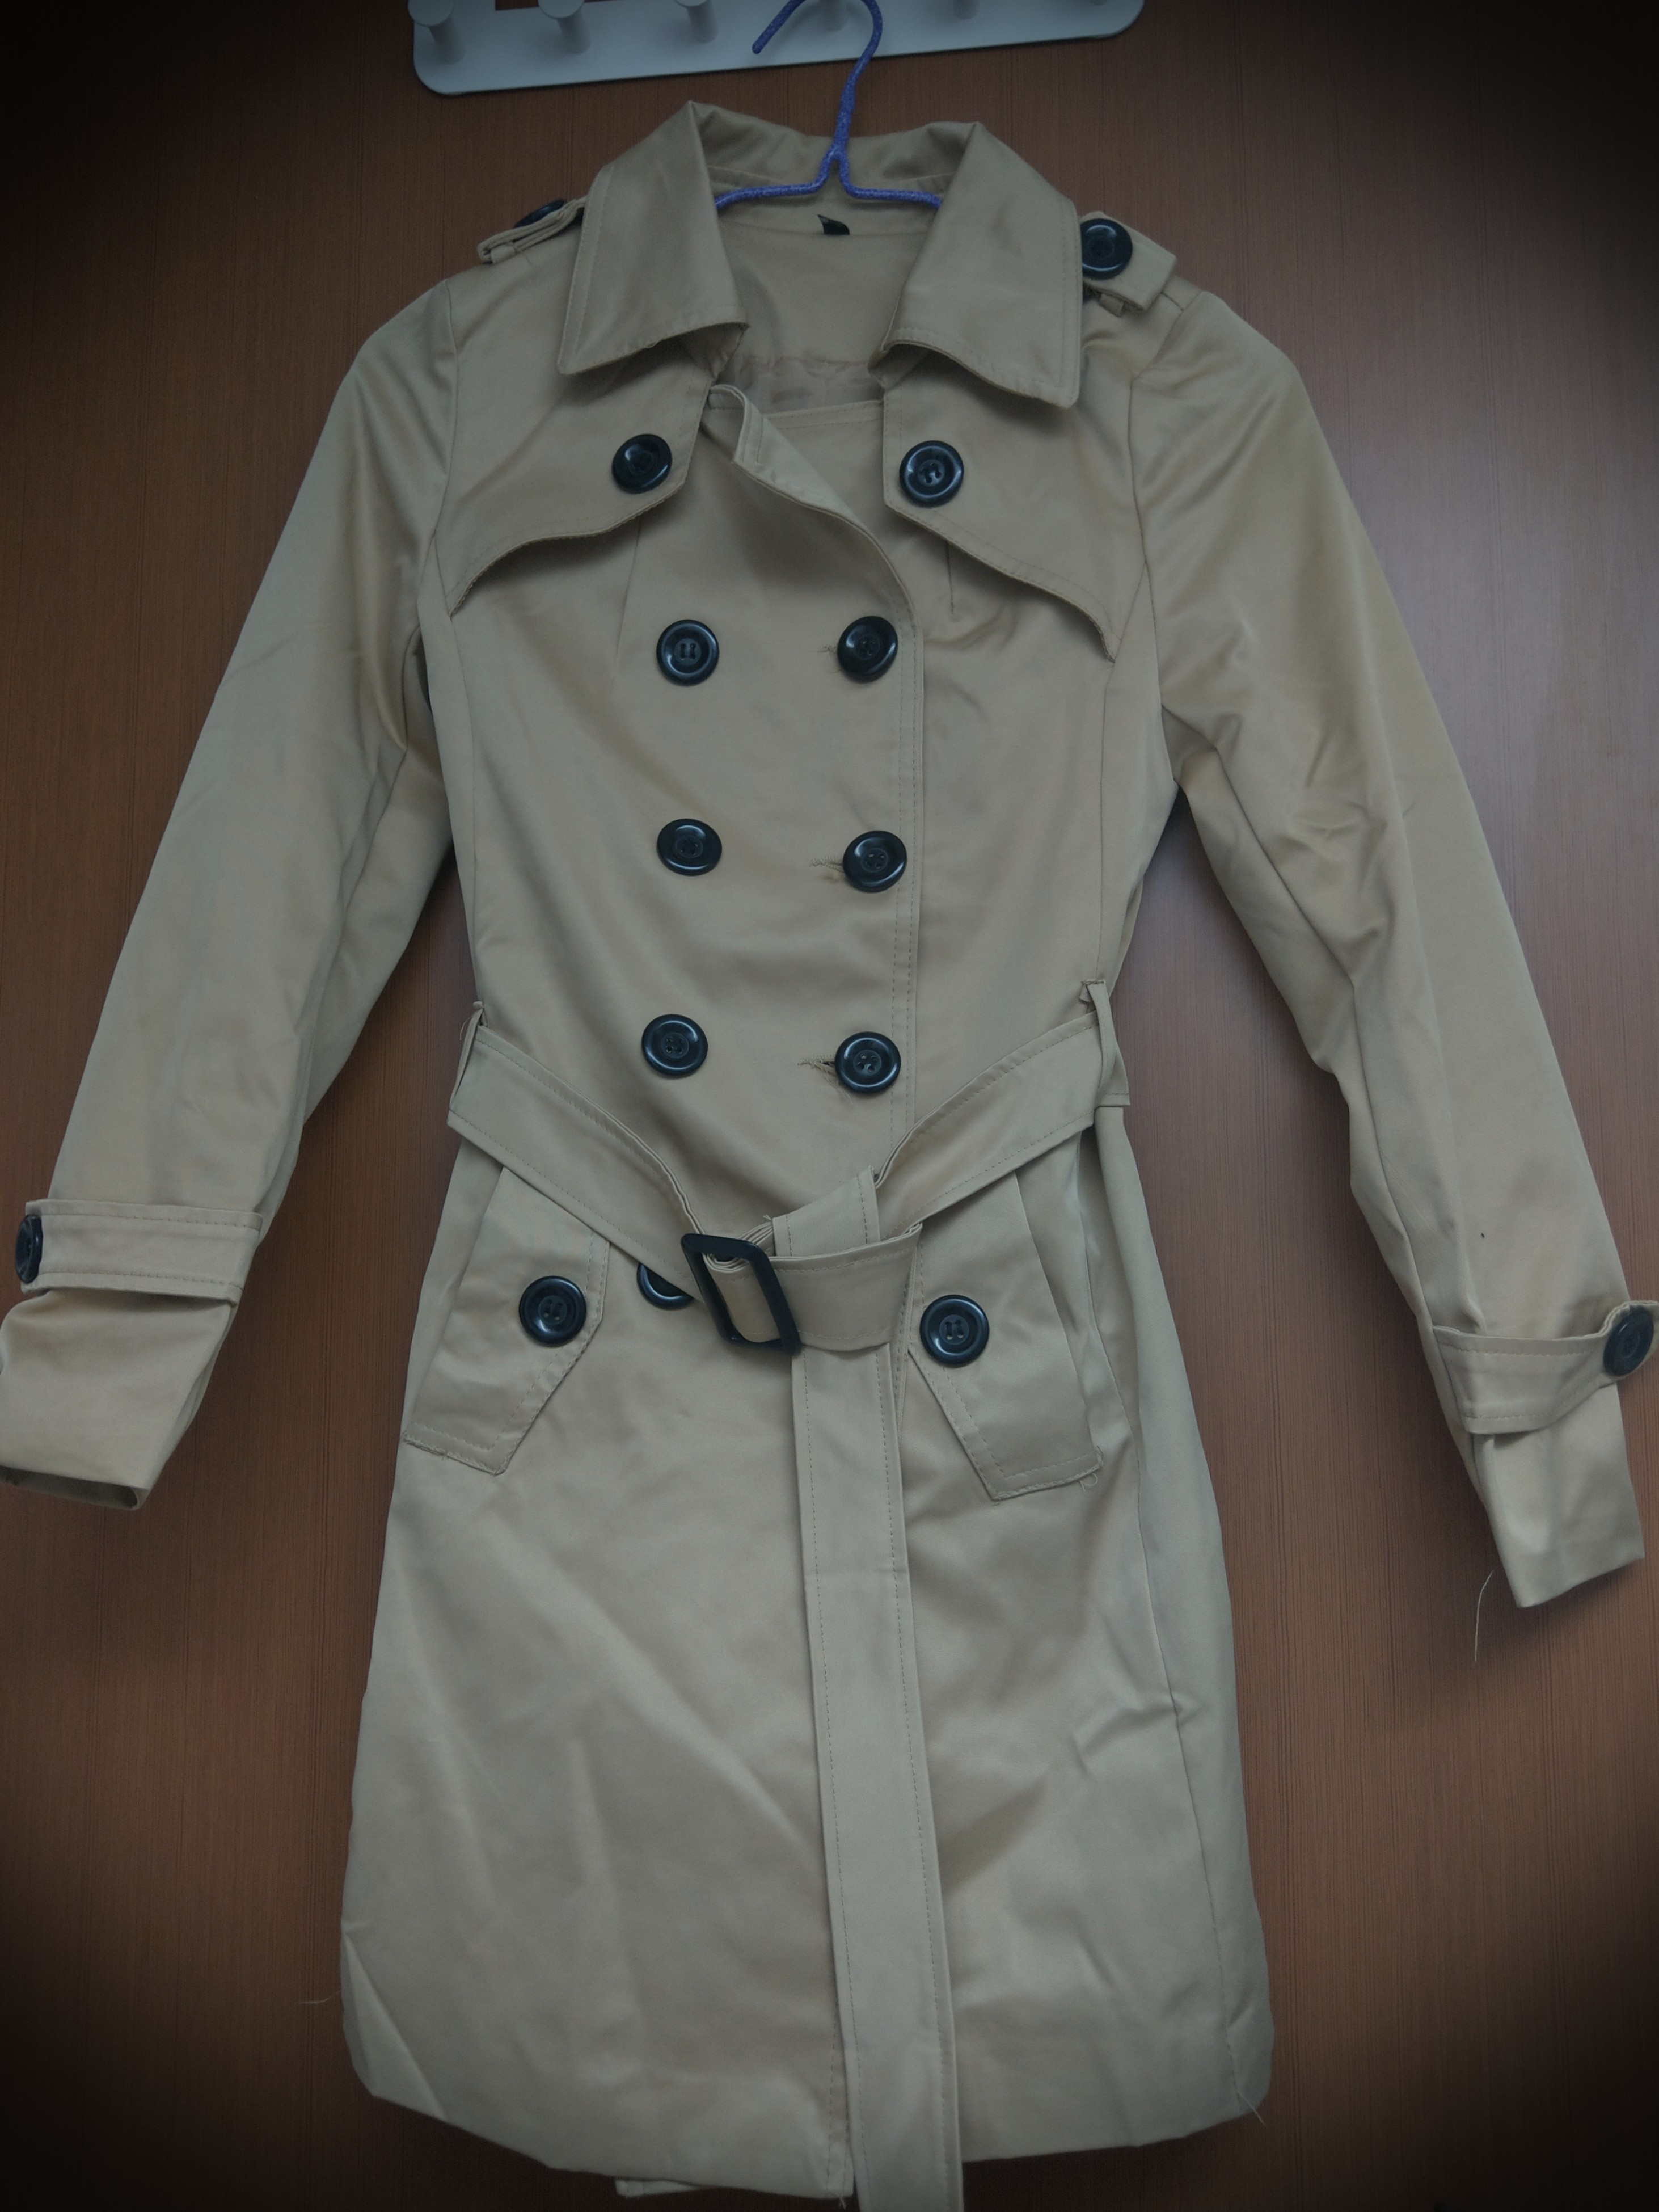 Detective-style Trench Coat, Women's Fashion, Coats, Jackets and ...